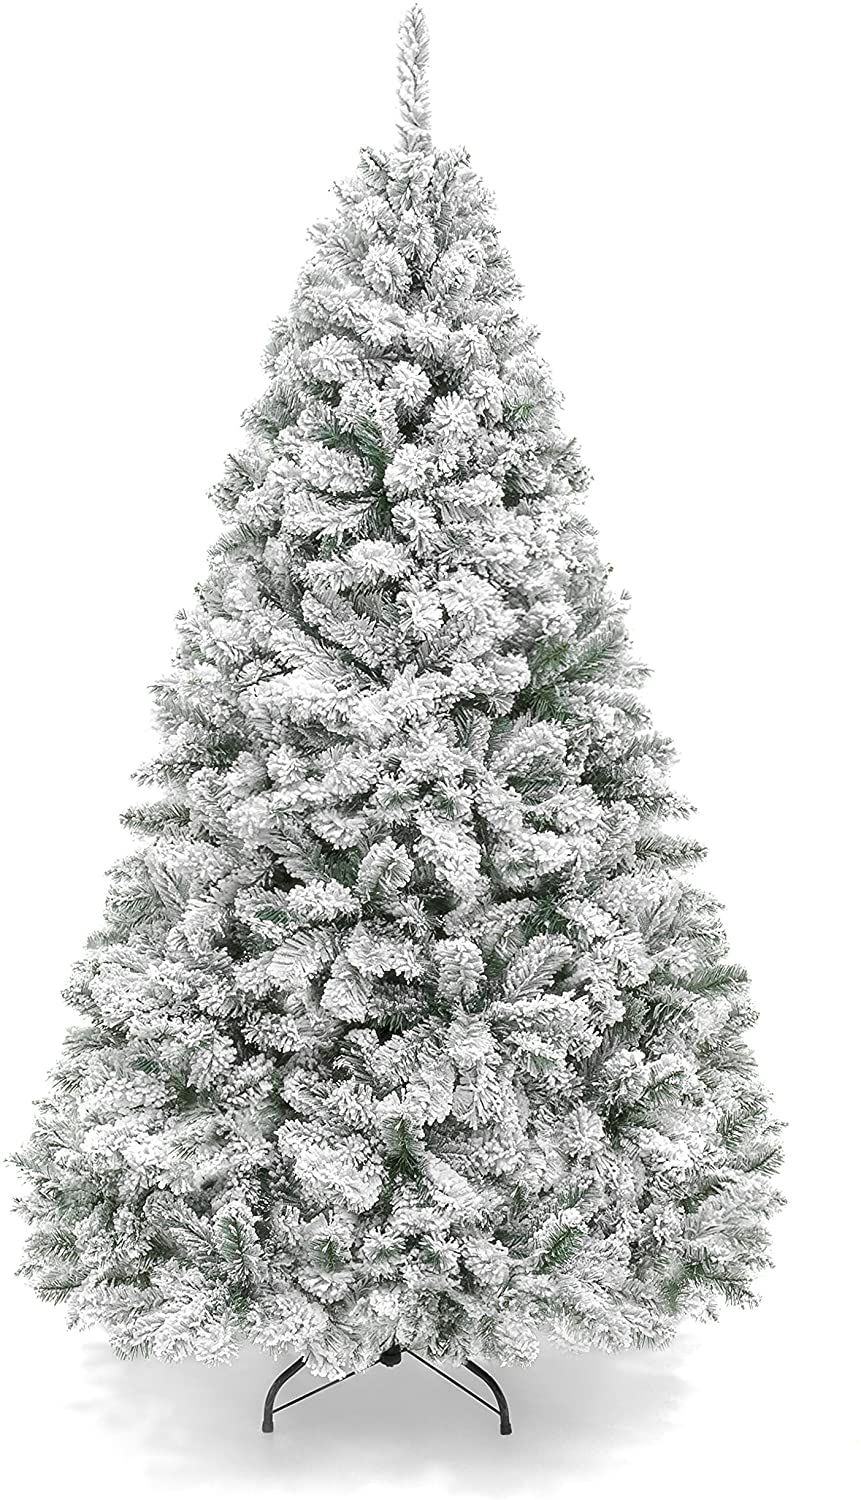 6ft Premium Snow Flocked Hinged Artificial Pine Christmas Tree Holiday Decor w/Metal Stand - $$title$$